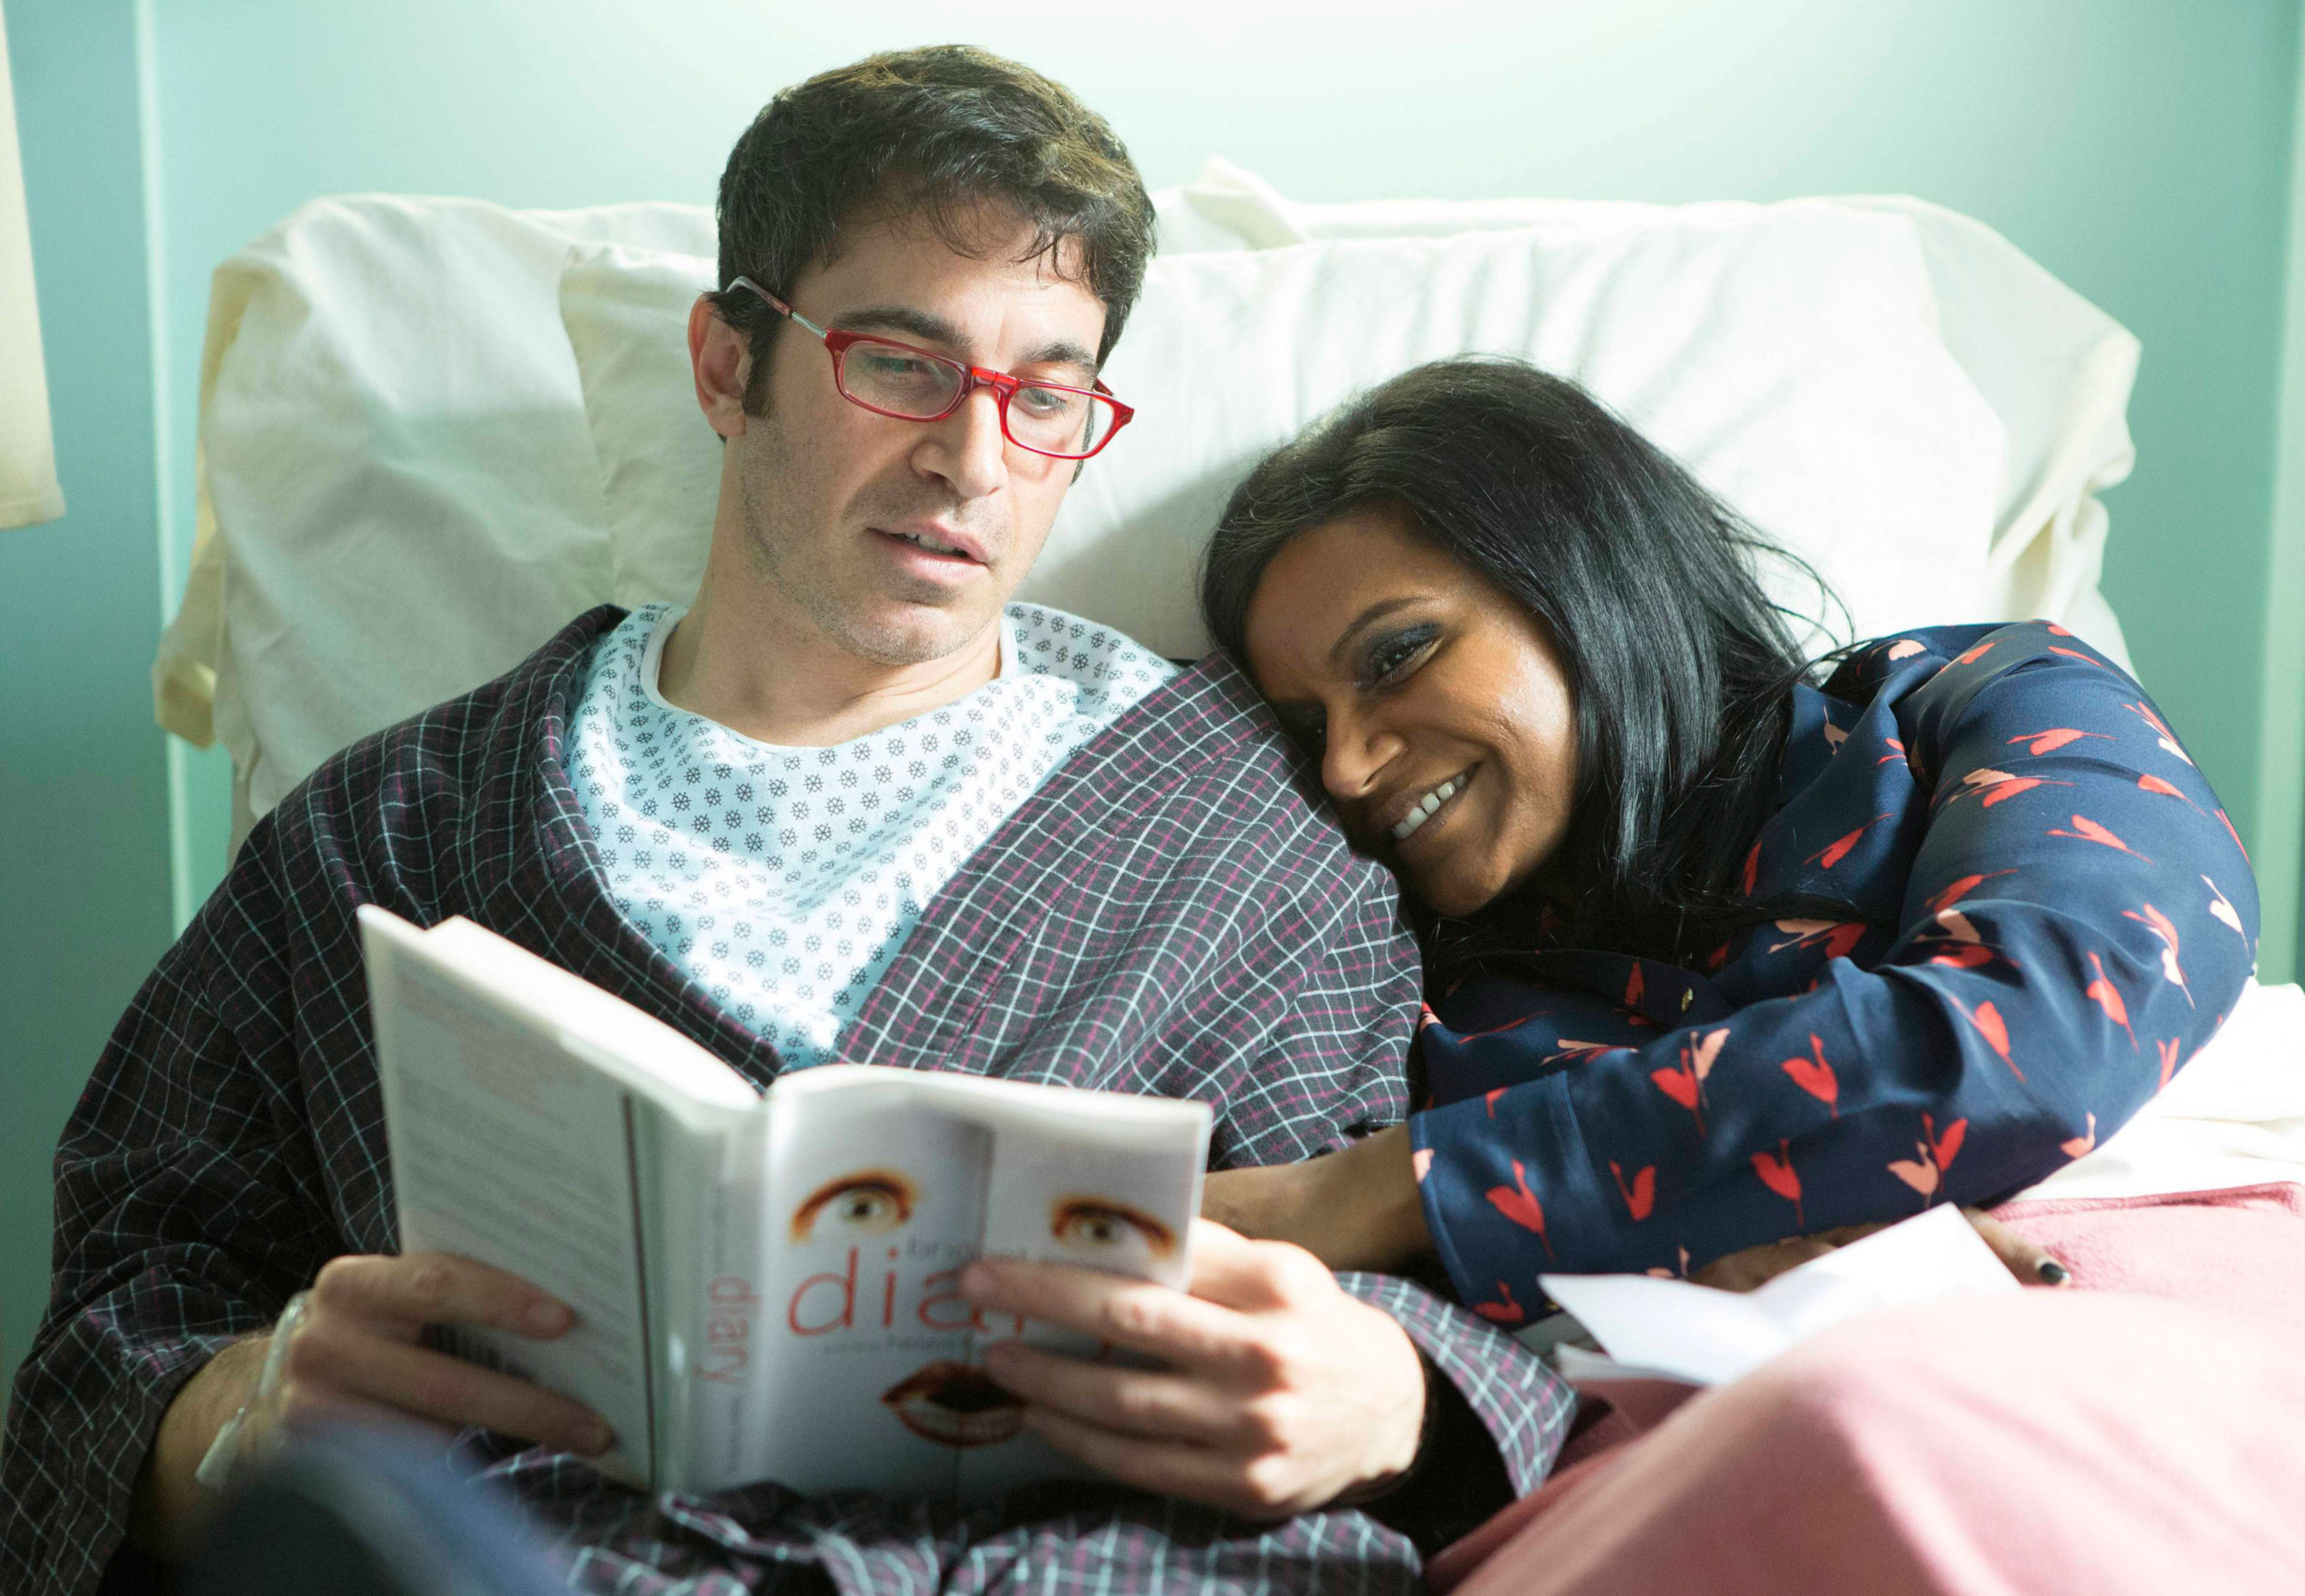 a character reading with glasses on while another character cuddles up beside him